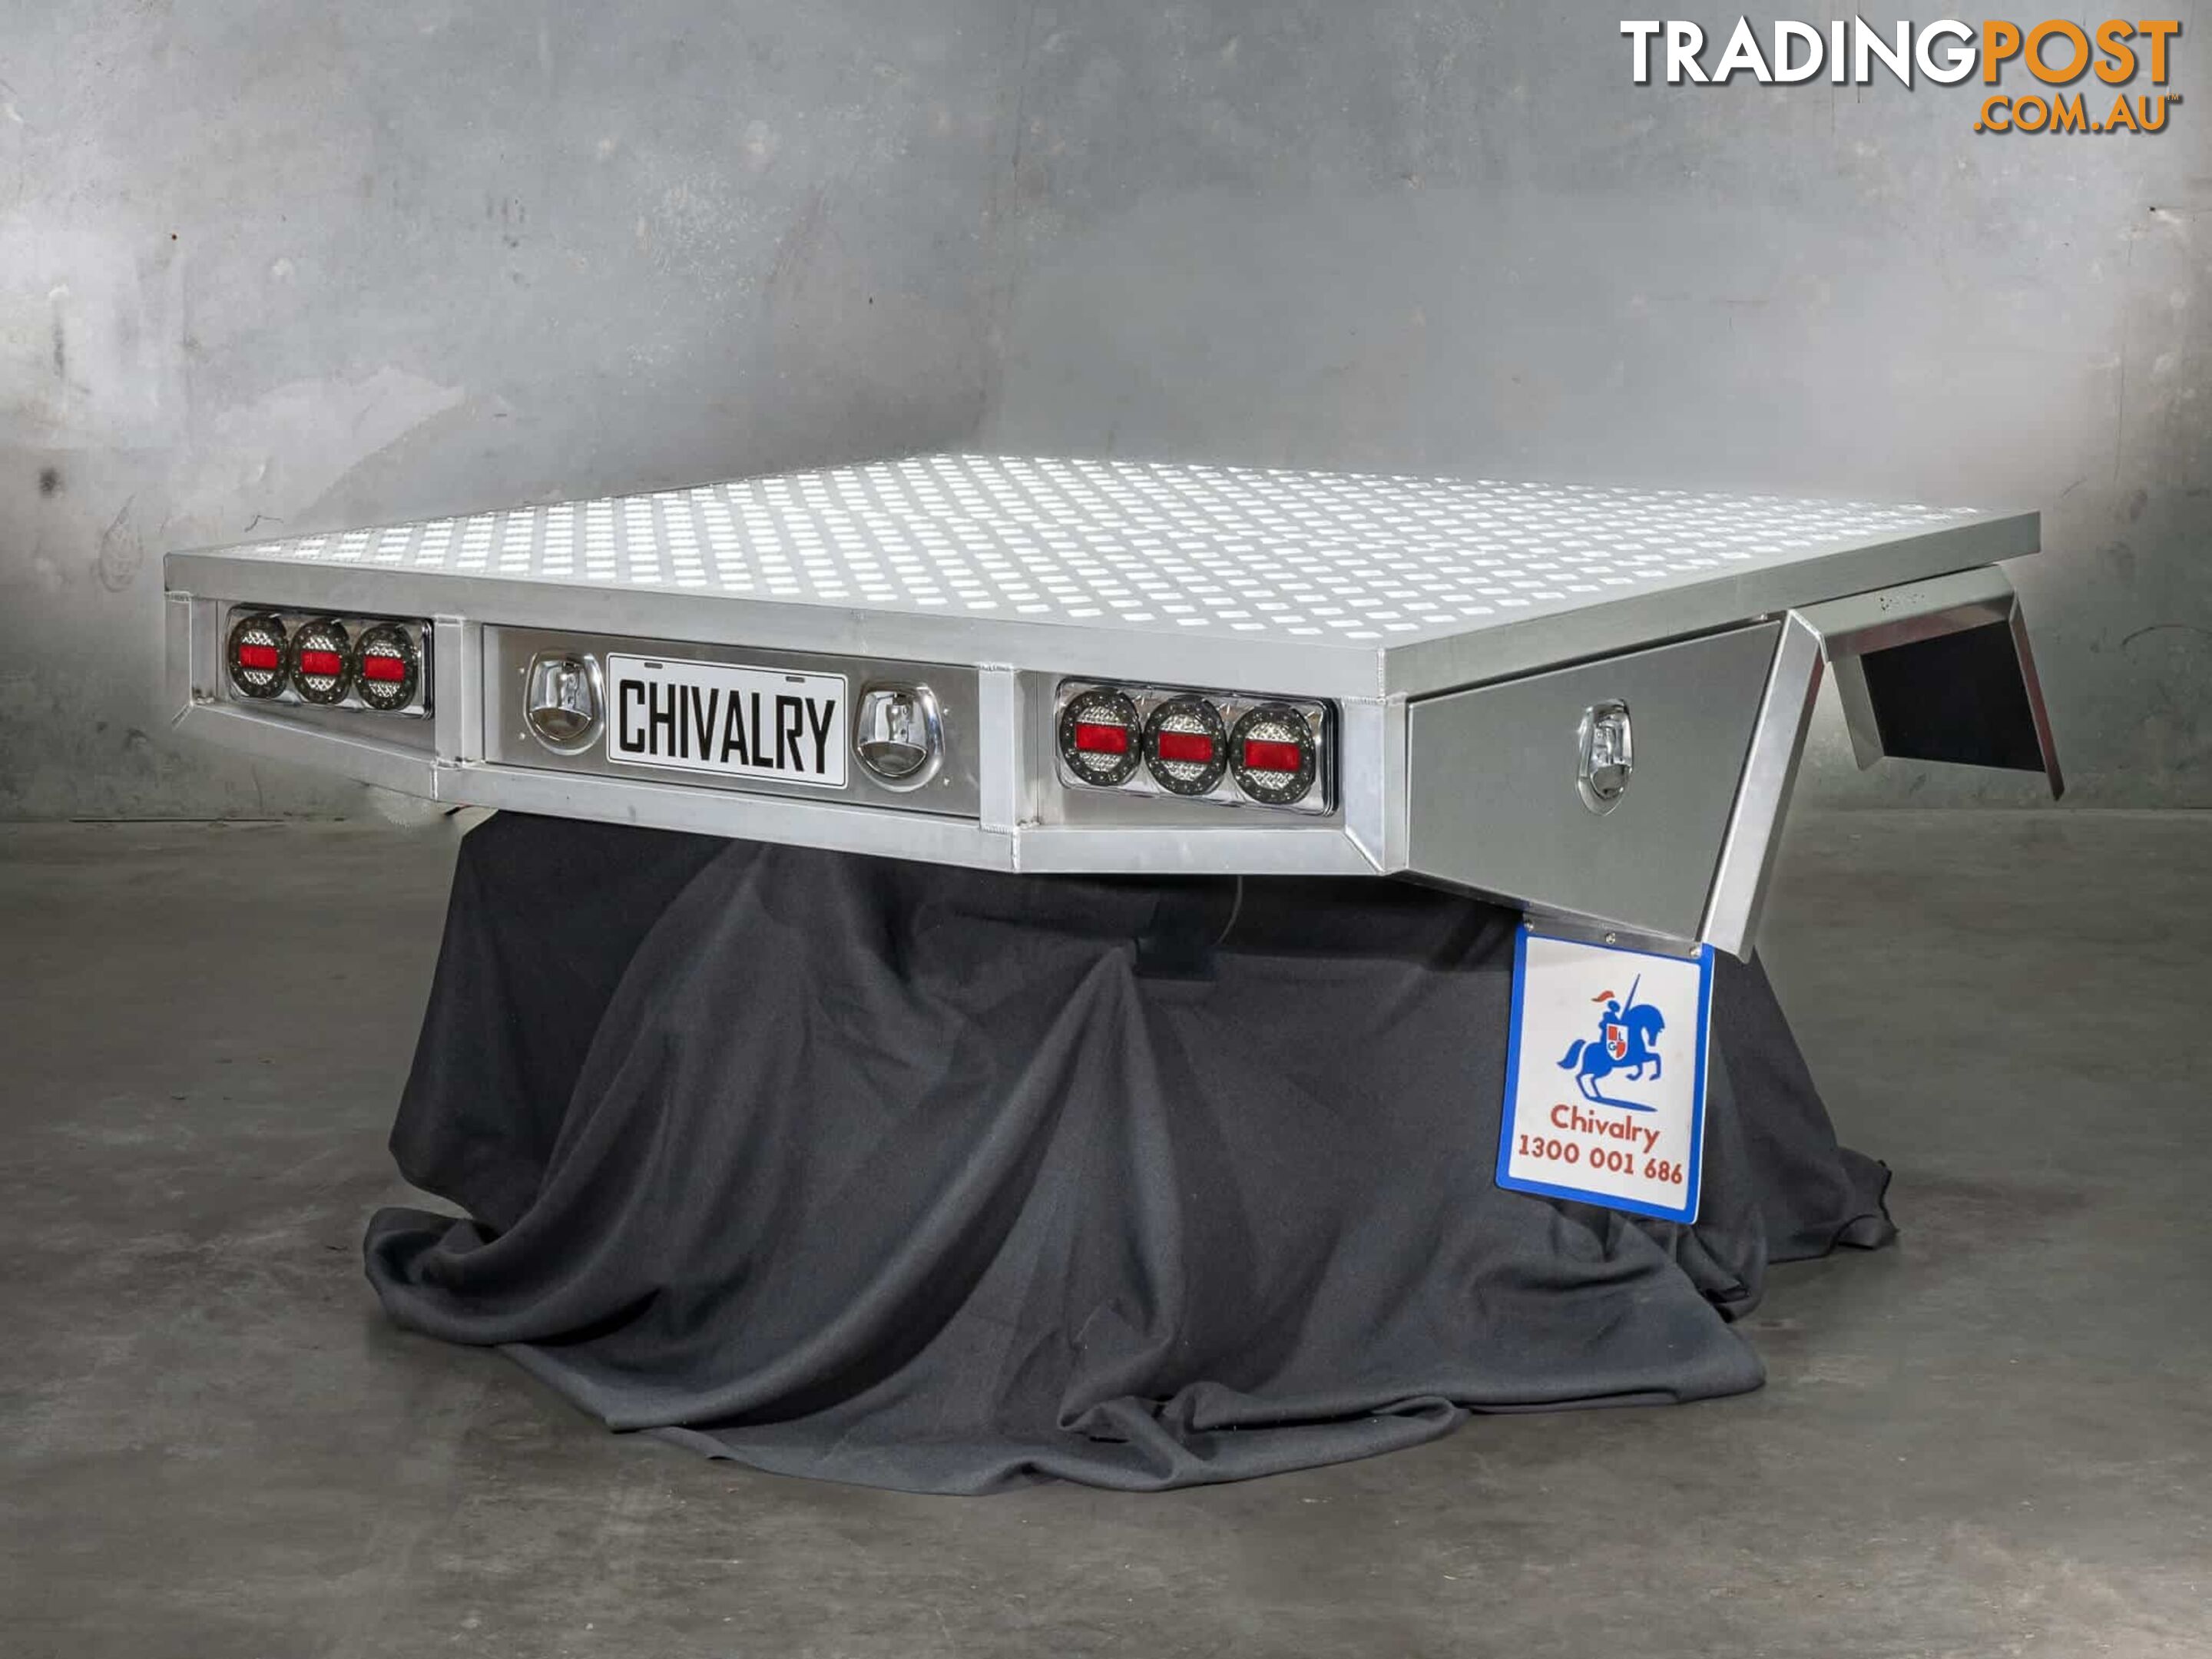 T3-WIDE 1800 DUAL CAB TRAY